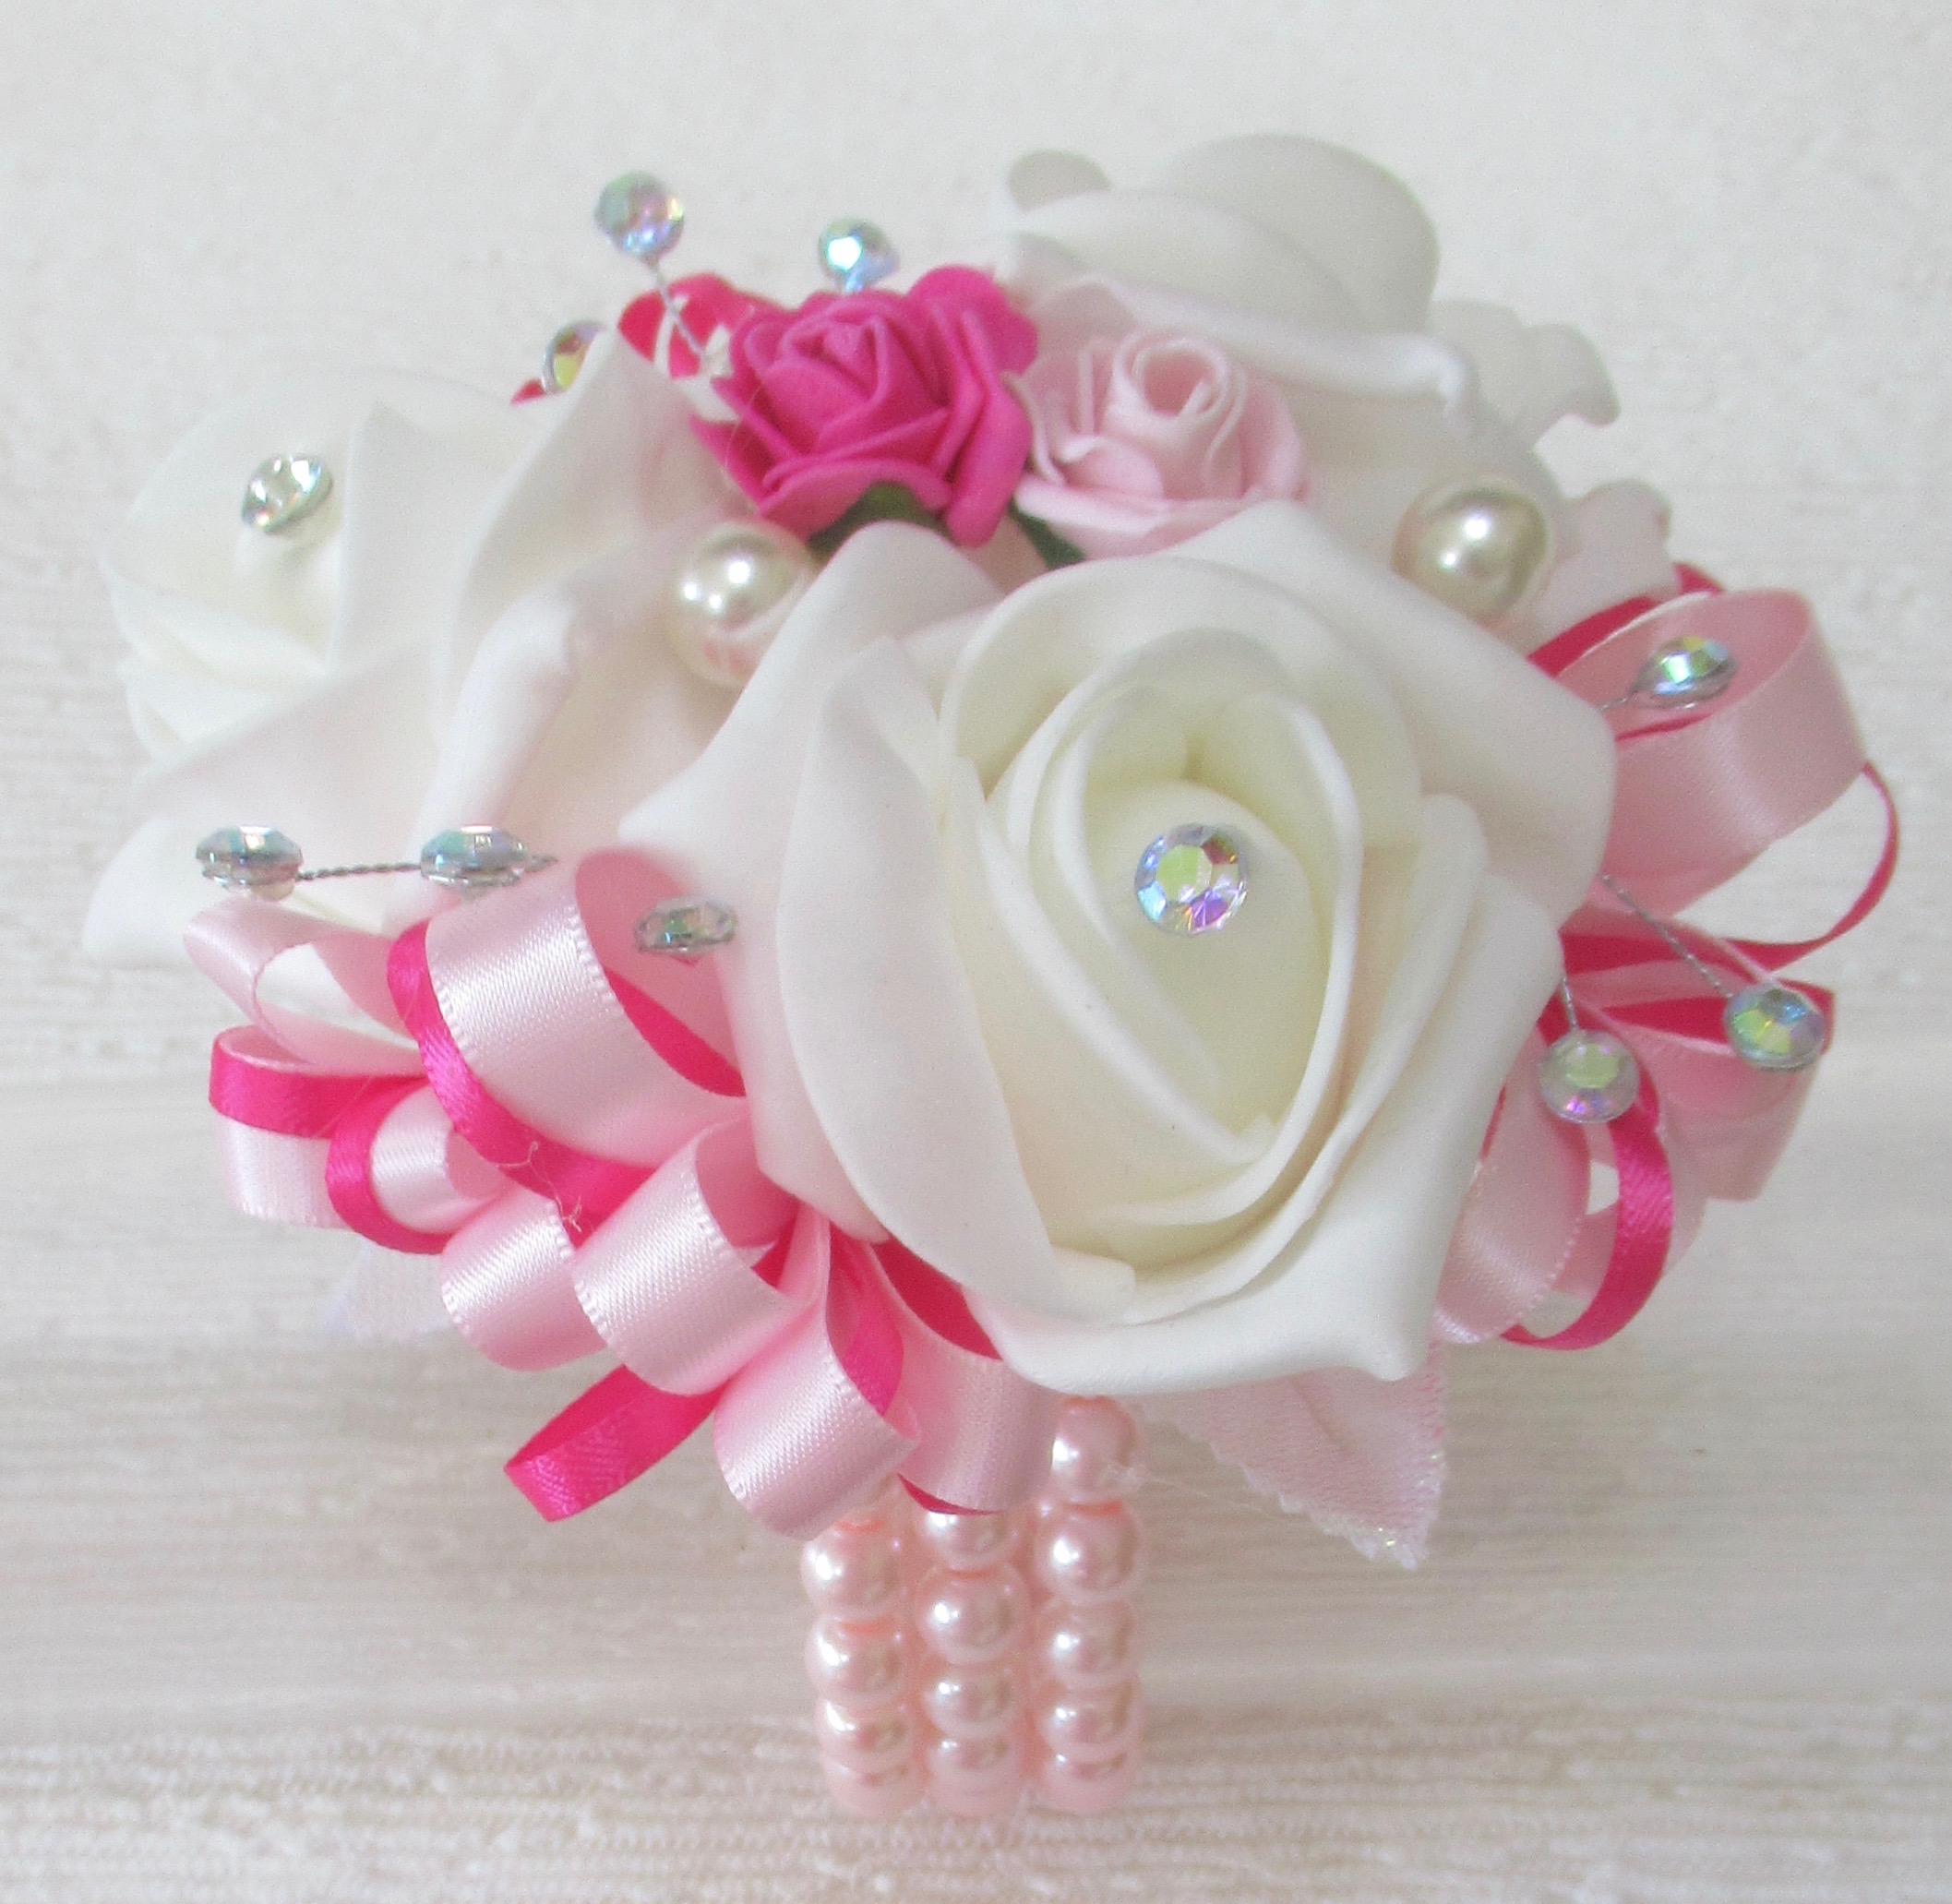 Fuchsia, Baby Pink & White Wrist Corsage With Crystals